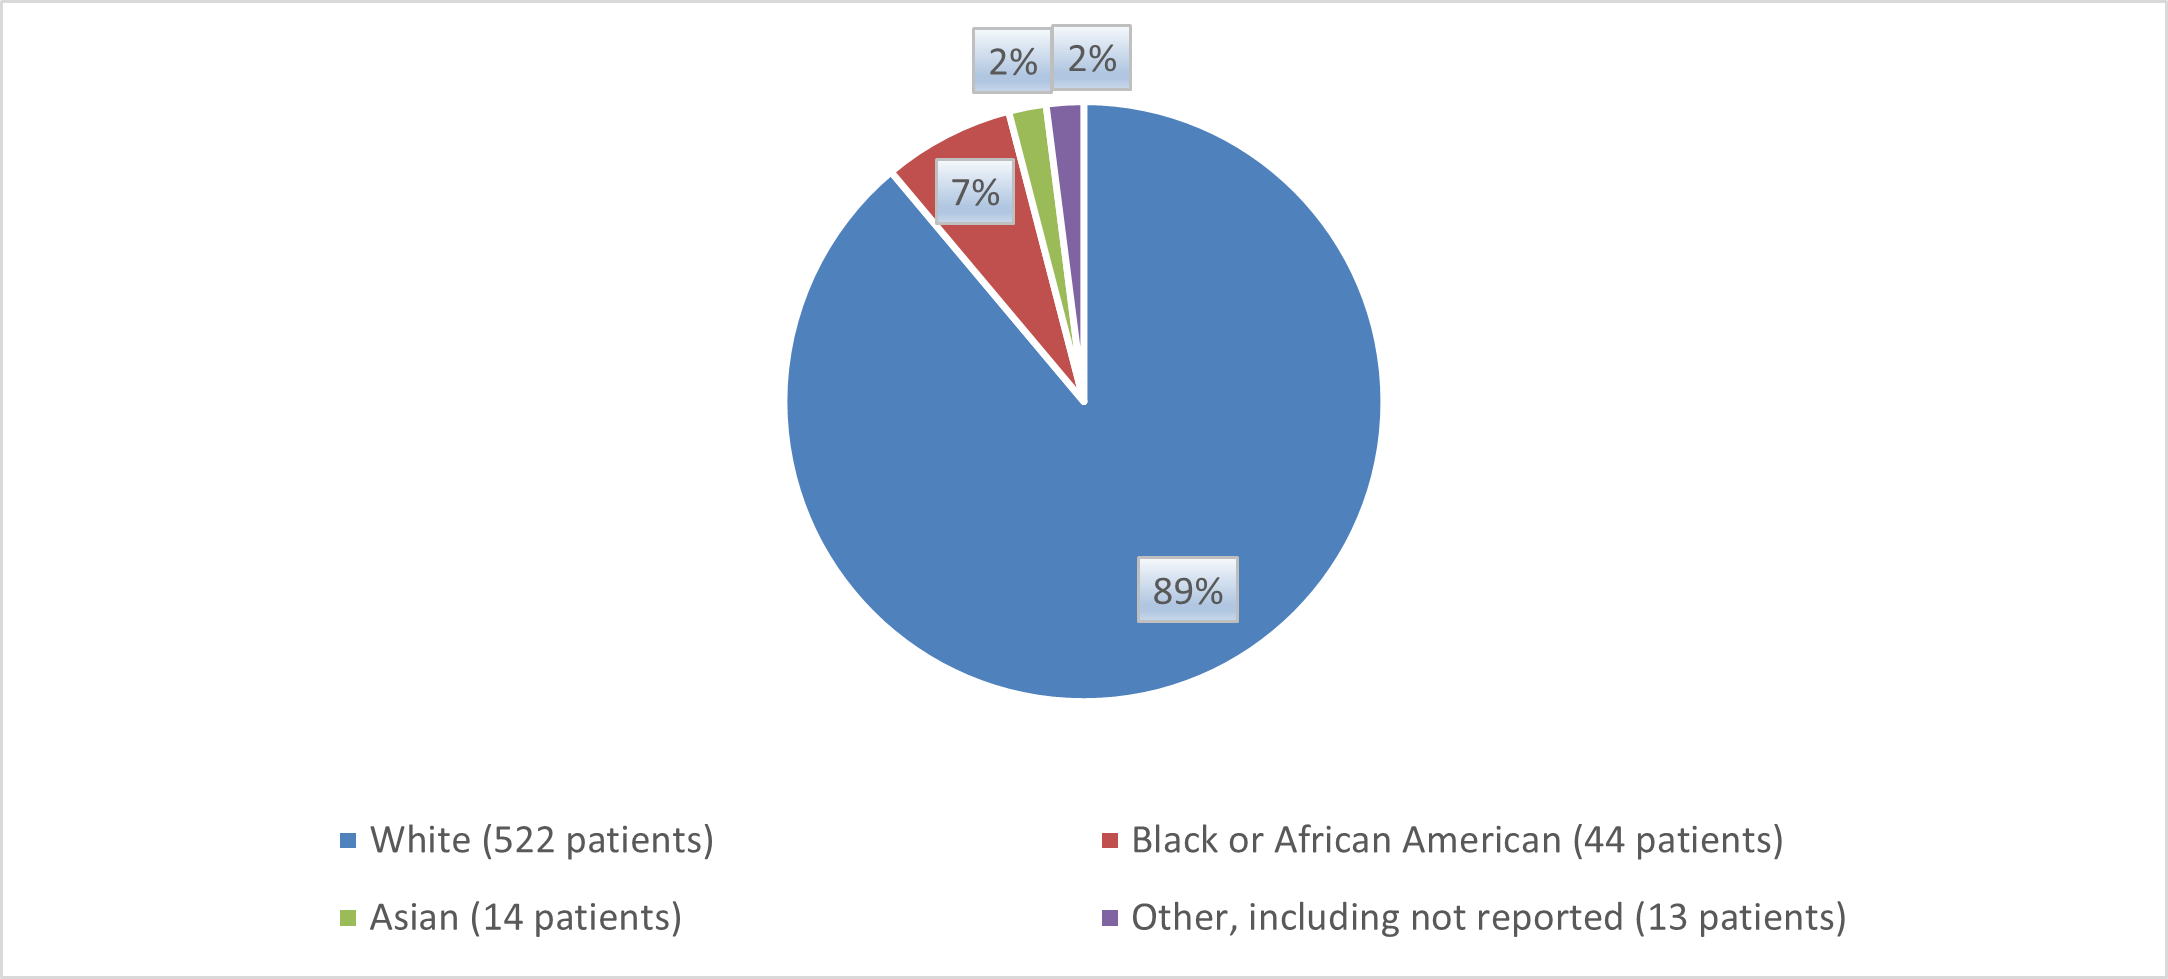 Pie chart summarizing how many White, Black, Asian, and other patients were in the clinical trial.  In total, 522 (89%) white patients, 44 (7%) Black patients, 14 (2%) Asian patients, and 13 (2%) Other patients participated in the clinical trial.